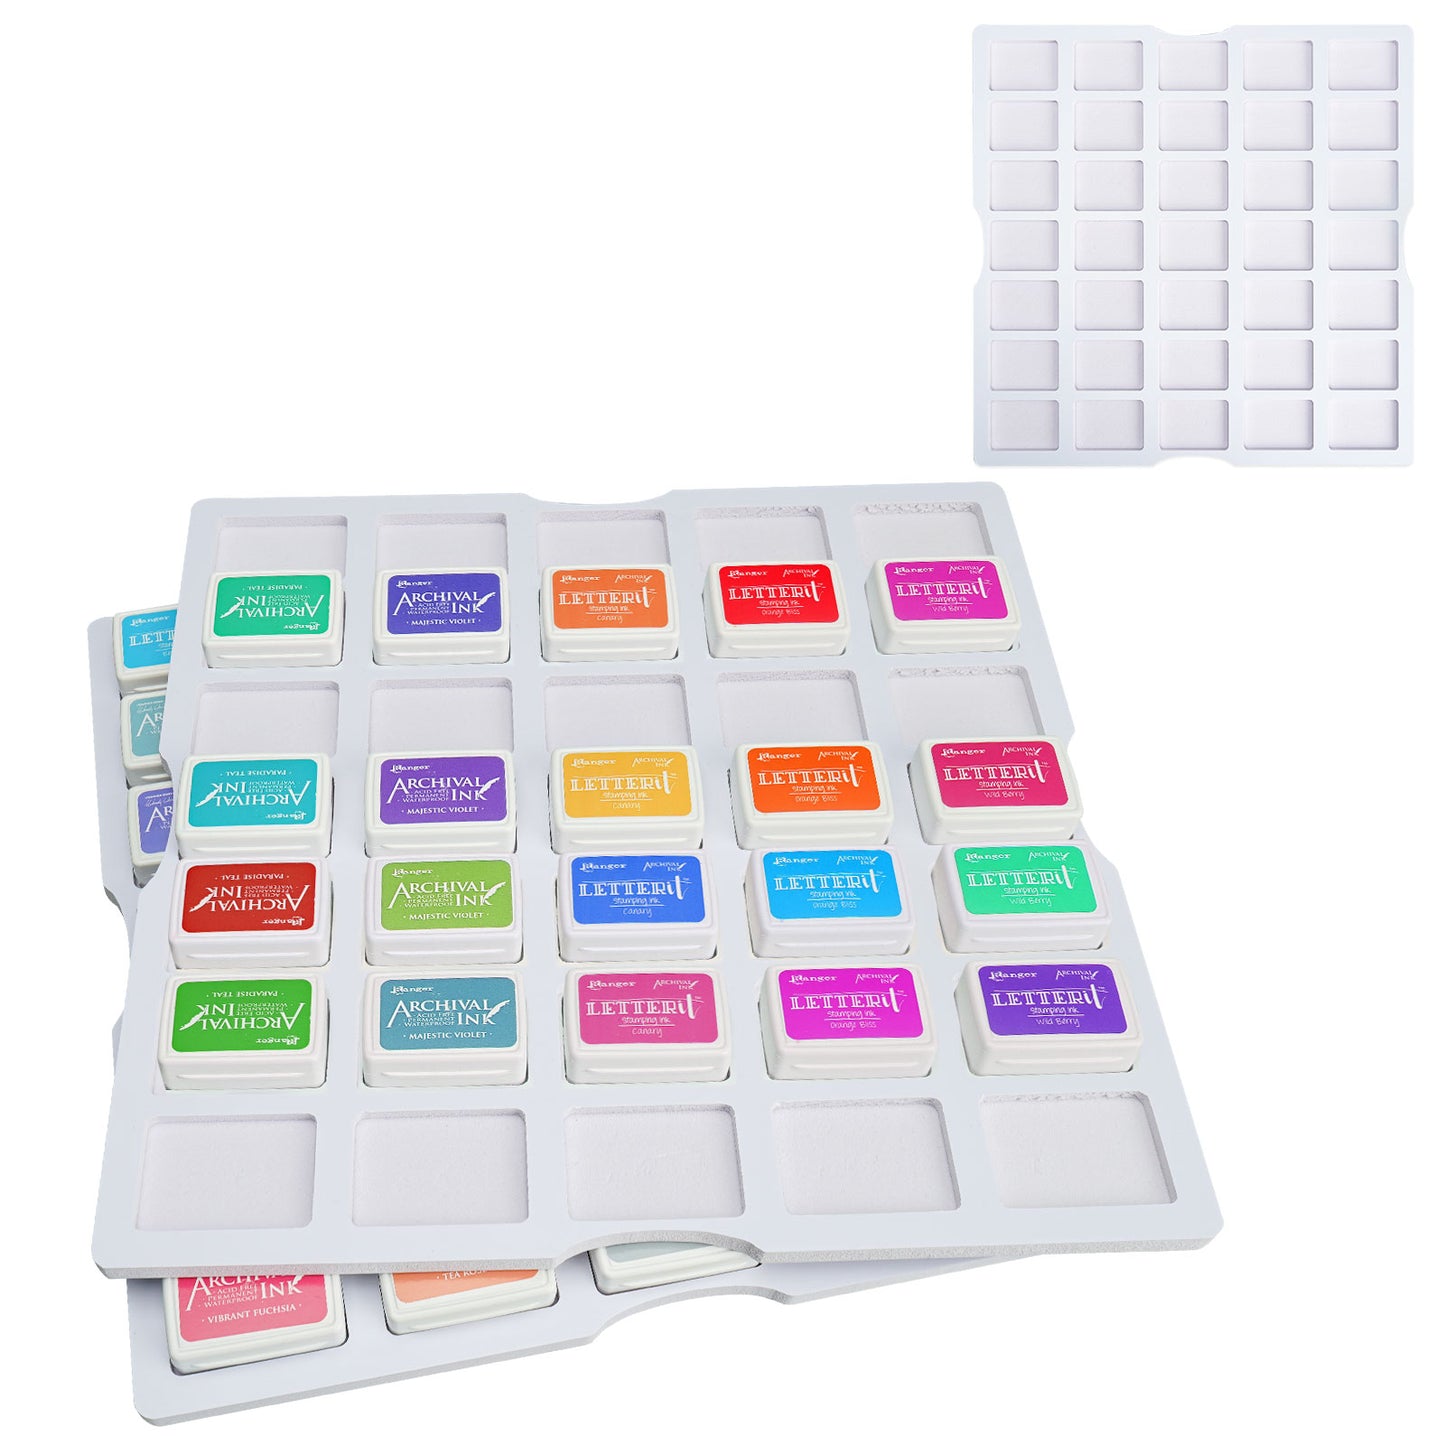 70 Grids Ink Pad Cuboid Caddy, 2 Large Trays